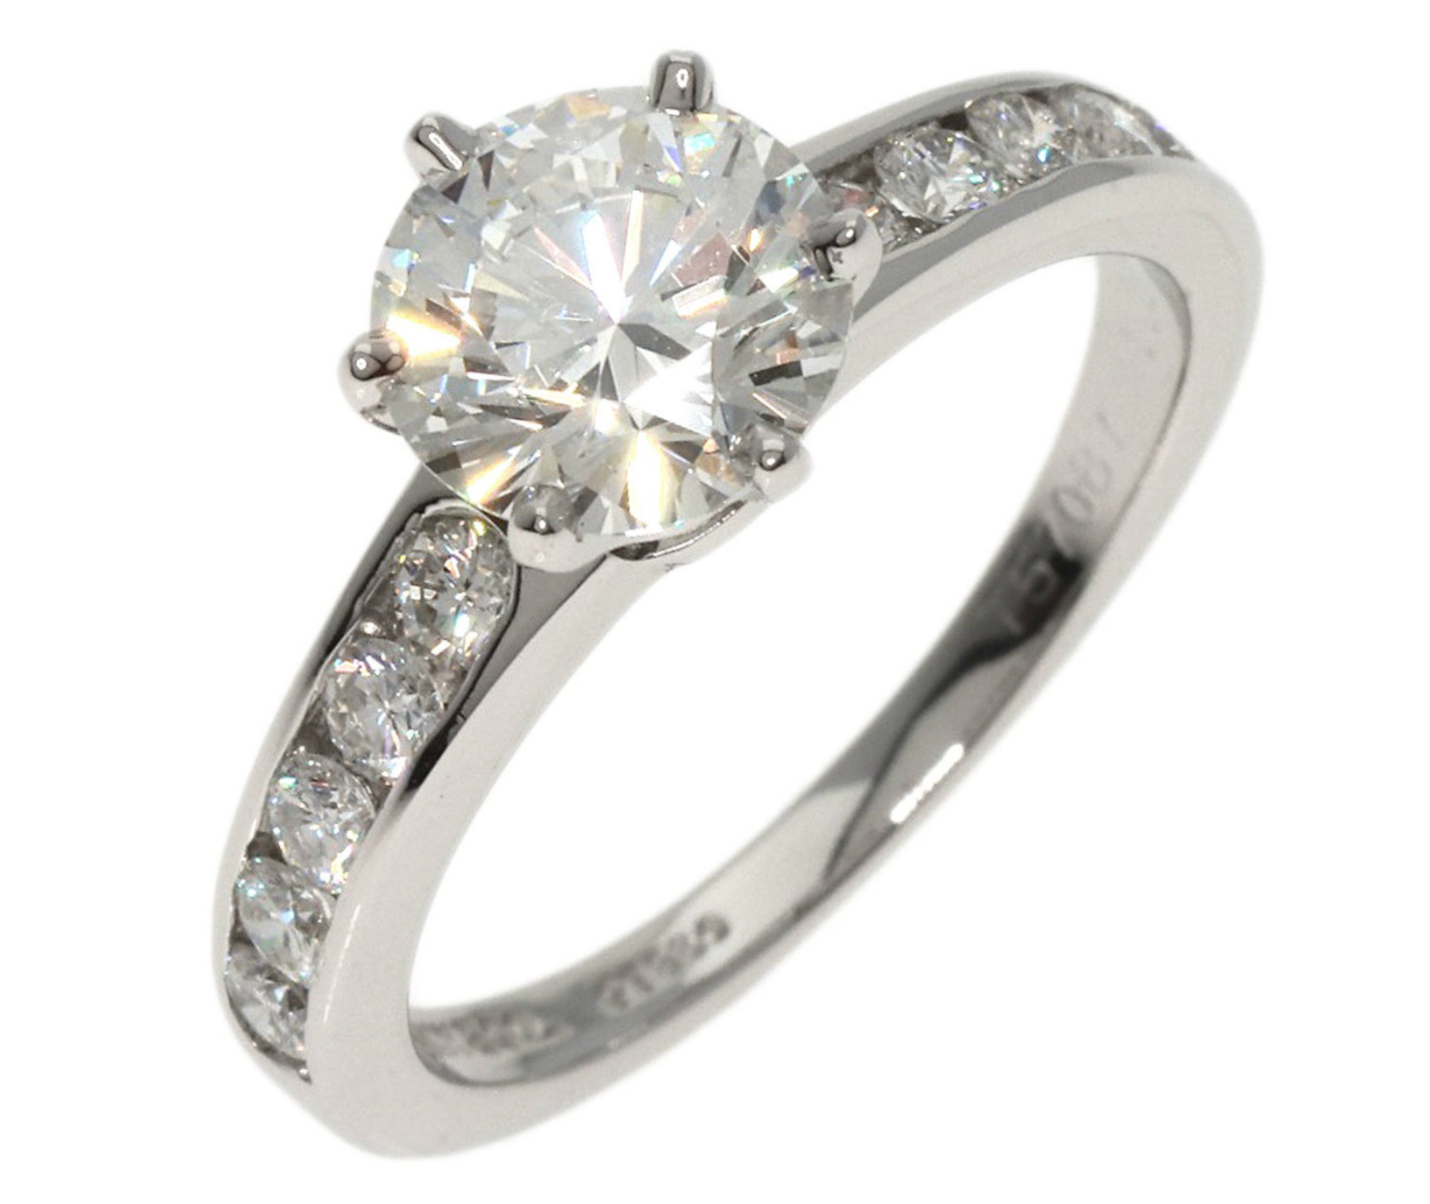 Pre-owned Platinum Tiffany Setting Engagement Ring set with a 1.27ct center diamond